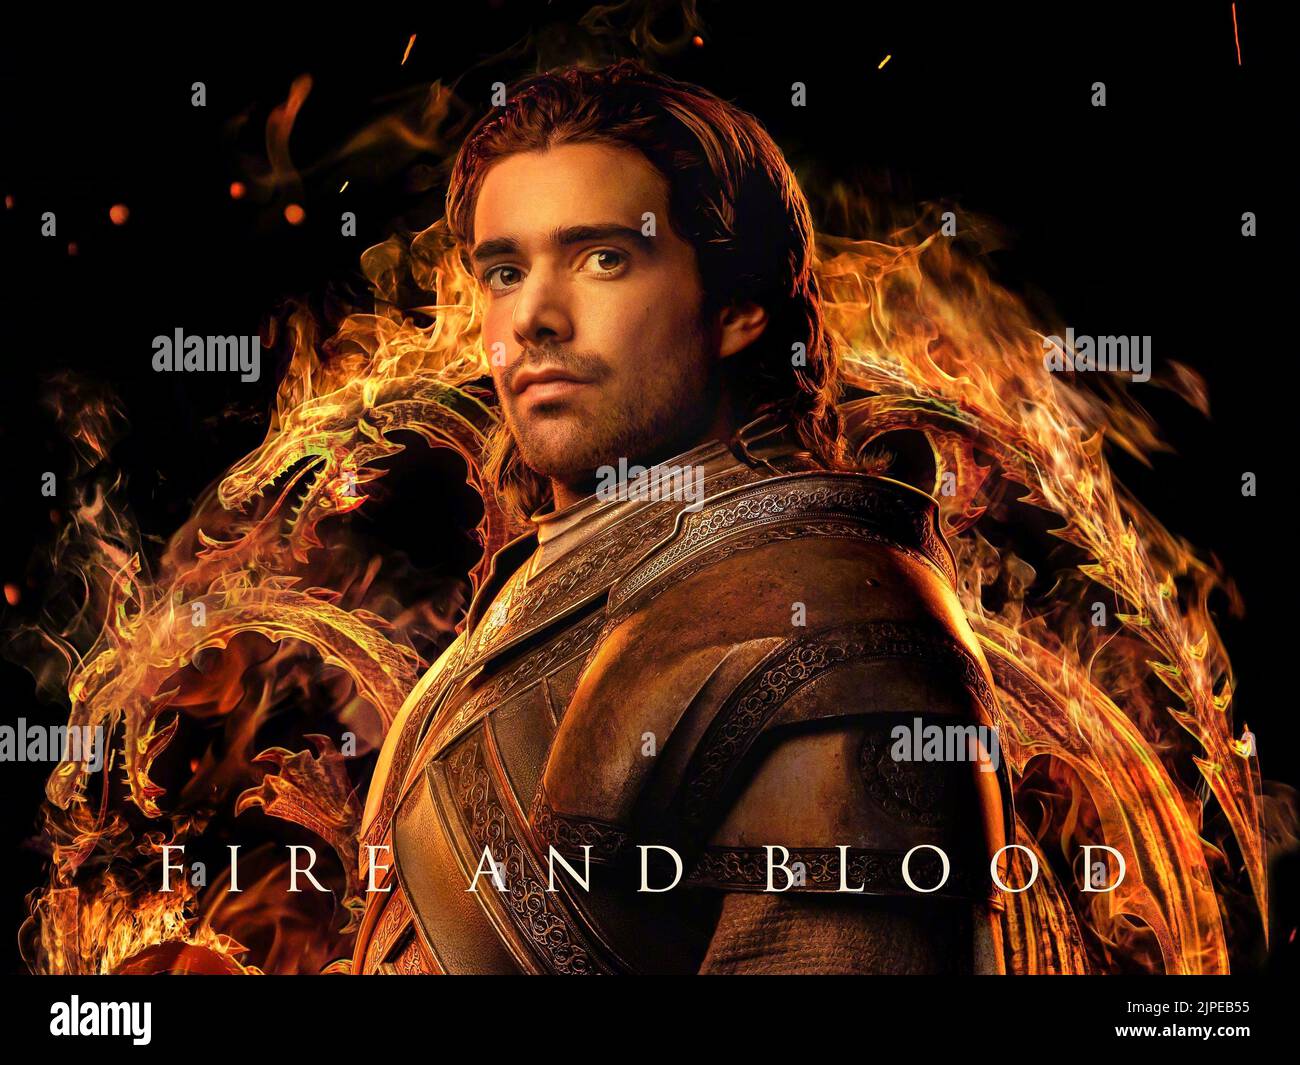 USA. Fabien Frankel   in the (C)HBO new series: House of the Dragon (2022).  Plot: The story of the House Targaryen set 300 years before the events of Game of Thrones (2011).  Ref: LMK106-J8255-150822 Supplied by LMKMEDIA. Editorial Only. Landmark Media is not the copyright owner of these Film or TV stills but provides a service only for recognised Media outlets. pictures@lmkmedia.com Stock Photo